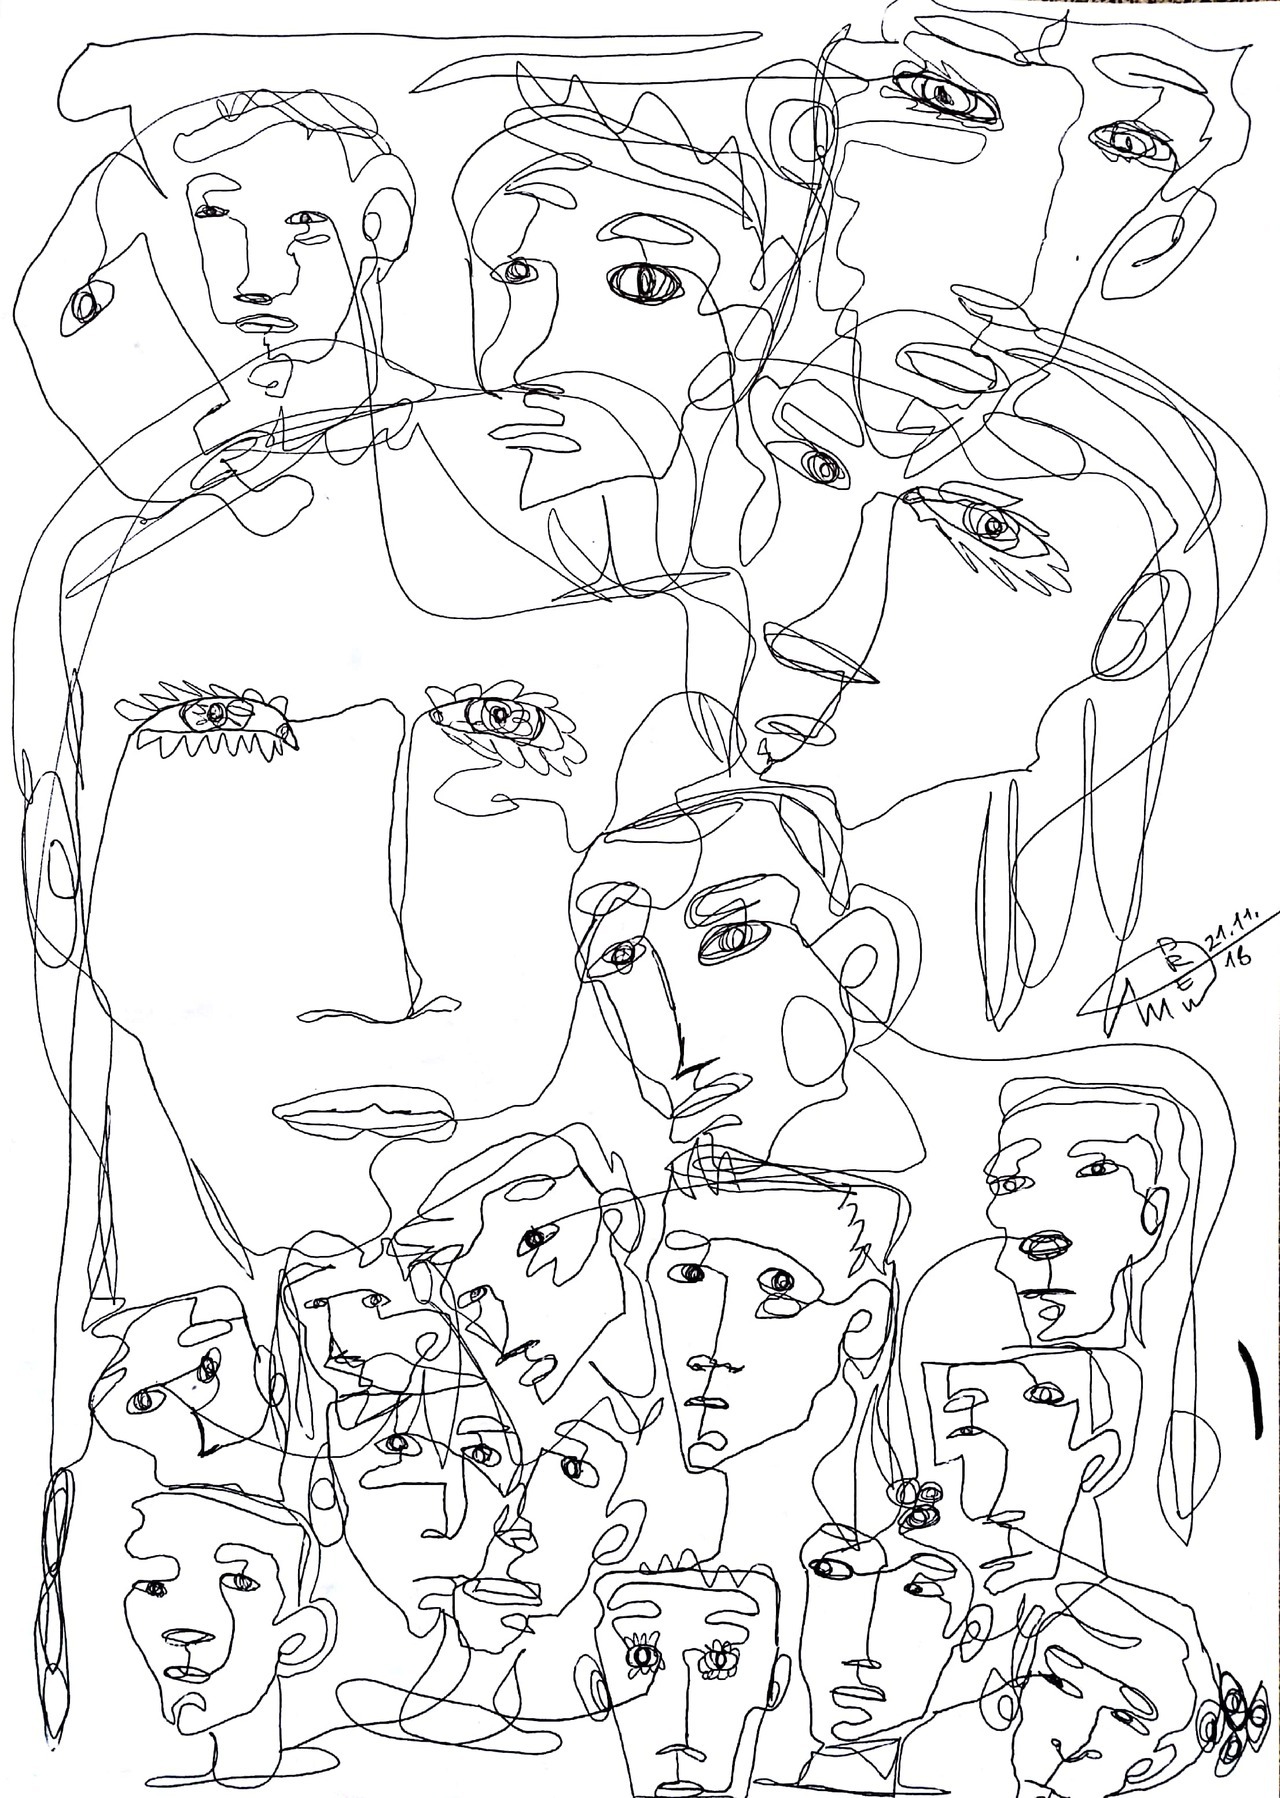 one line drawing on Tumblr